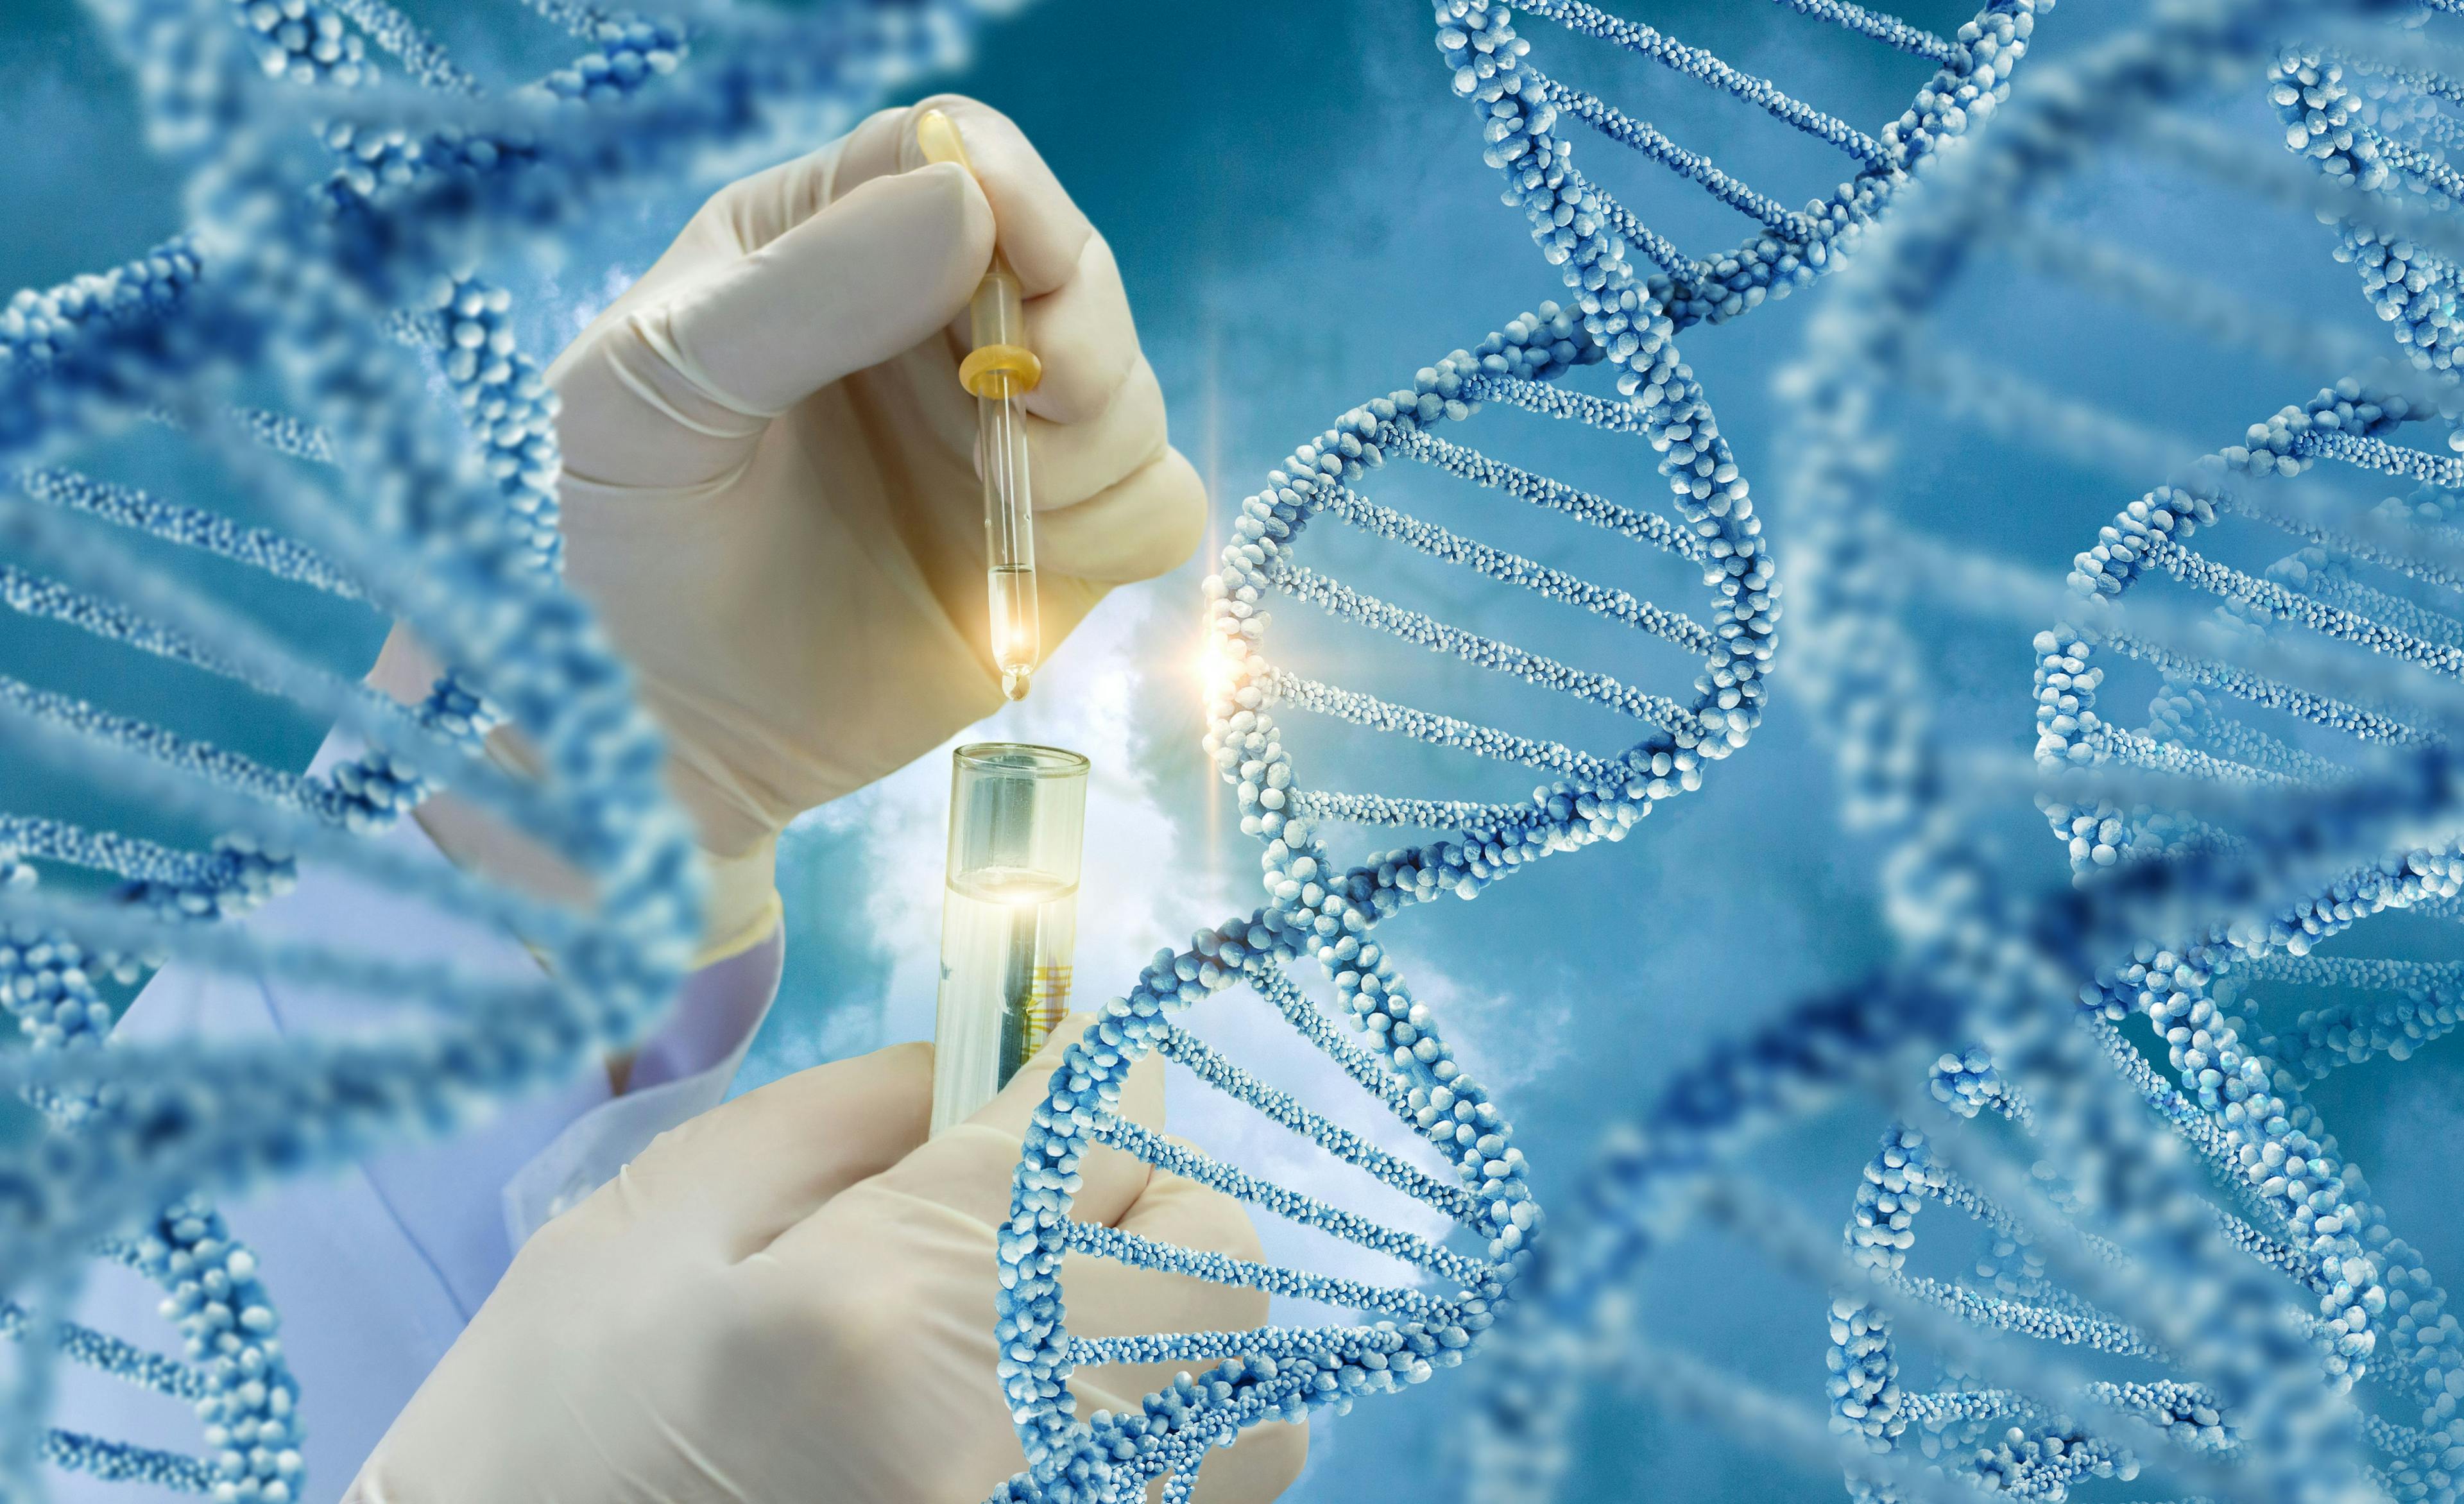 How Precision Medicine and Genetic Testing Will Drive Value-based Care